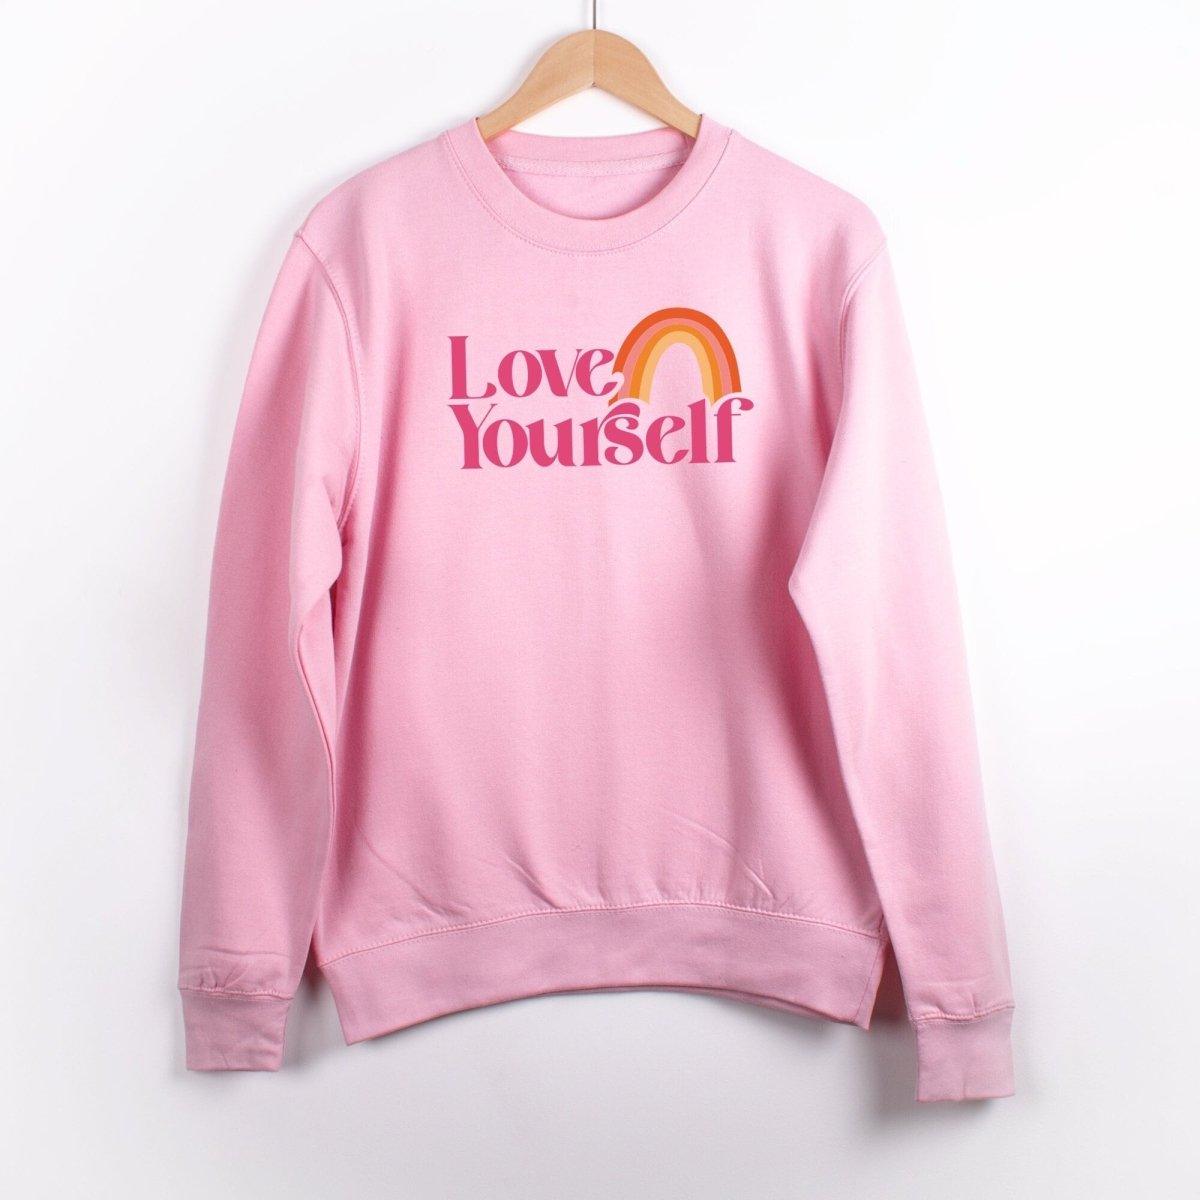 Love Yourself Jumper, Love Yourself Sweater, Mental Health Jumper, Ladies Positive Jumper - Amy Lucy